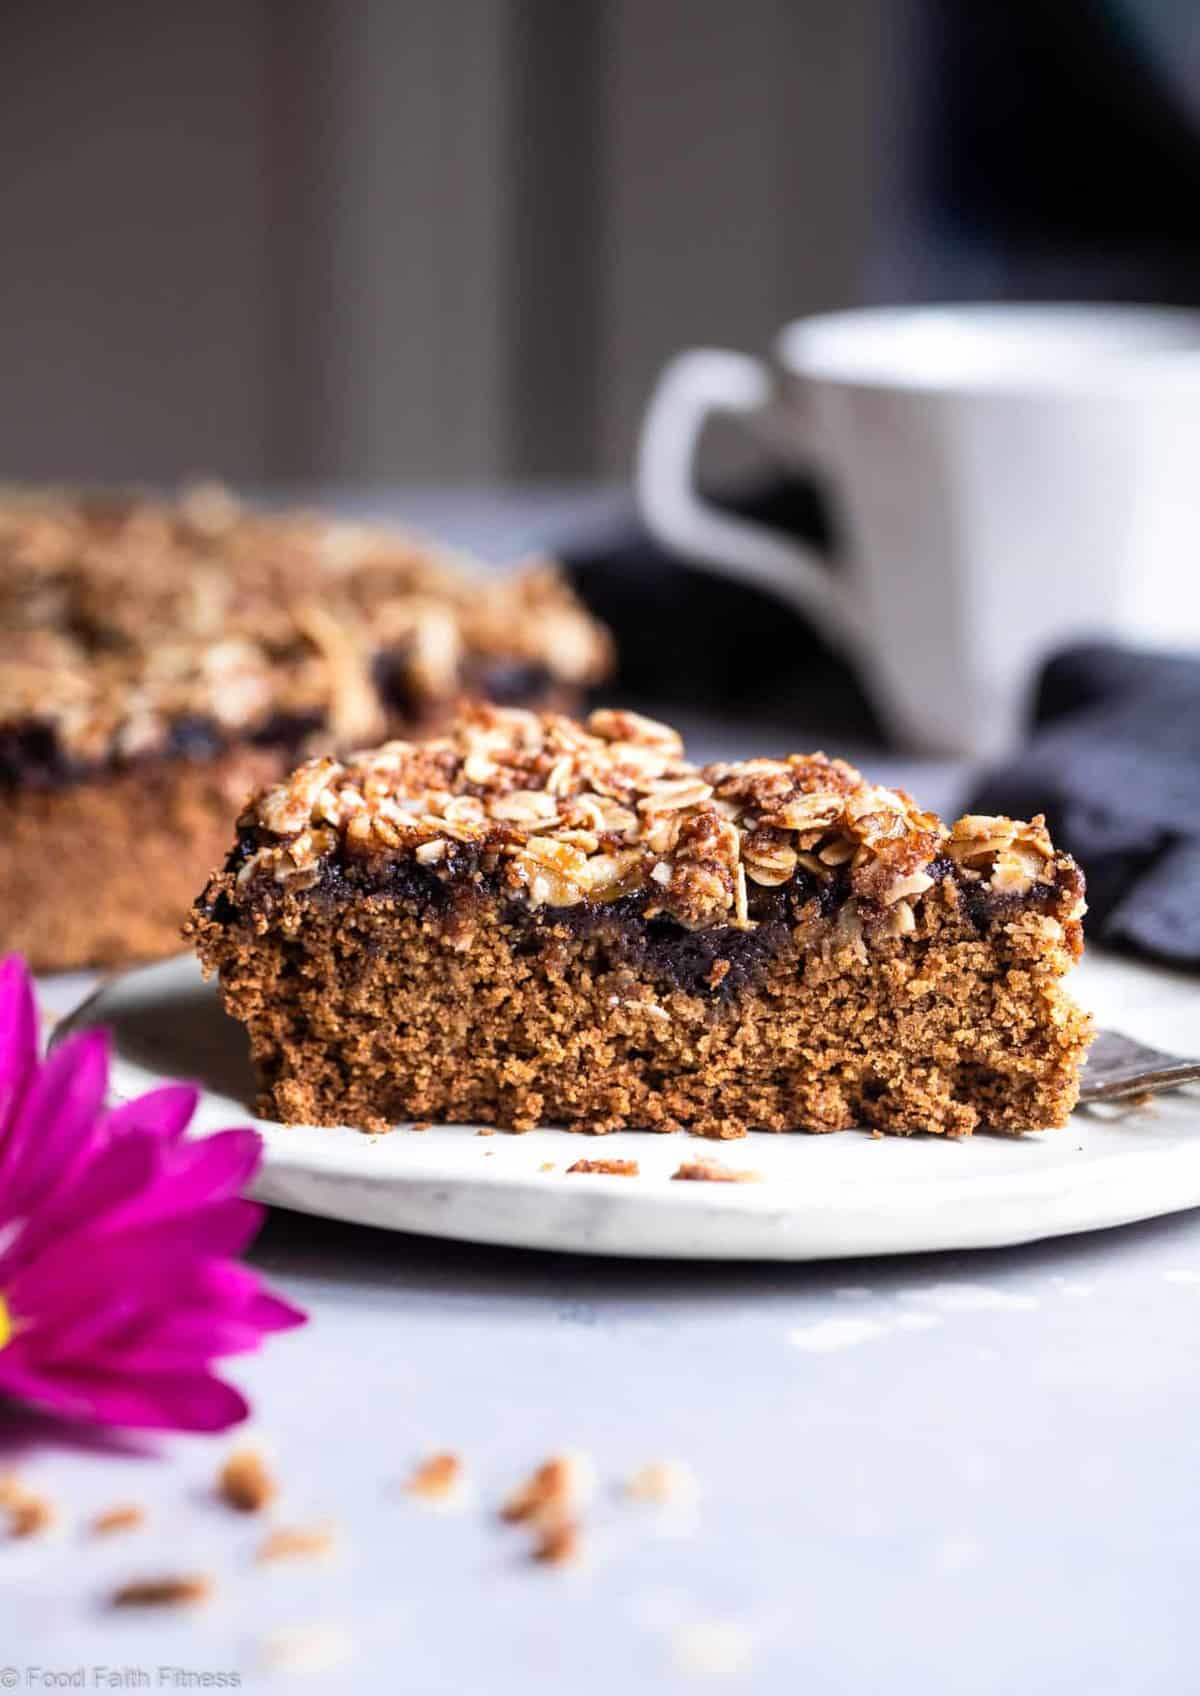 Gluten Free Vegan Coffee Cake - This tender, moist Gluten Free Coffee Cake has a tasty blackberry swirl and is loaded with a crunchy, crispy crumble topping! It's sure to be a hit and does not taste healthy! | #Foodfaithfitness | #Glutenfree #Vegan #dairyfree #eggfree #healthy